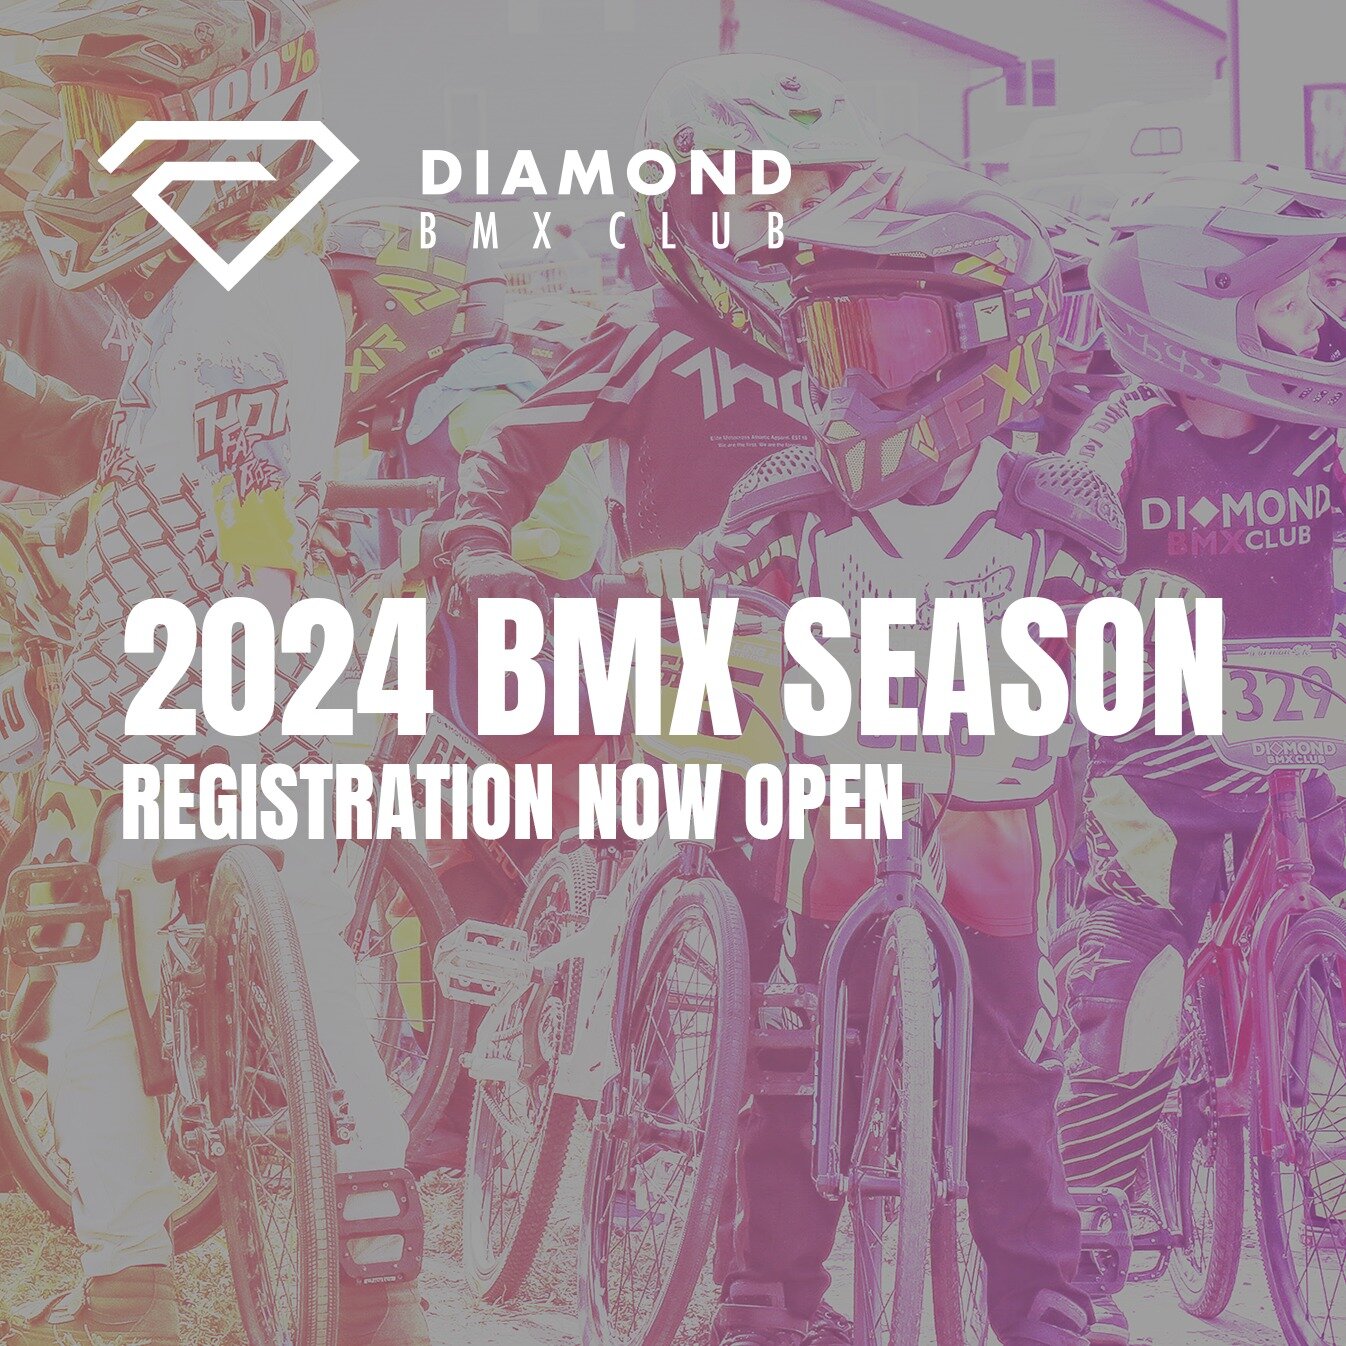 Diamond BMX, where legends are born,
Registration's open, dawn 'til morn!
Unleash the spirit, ignite the fire,
Ride with passion, aim even higher.

So heed the call, let the journey begin,
Diamond BMX, let the victory in.
Registration awaits, seize t